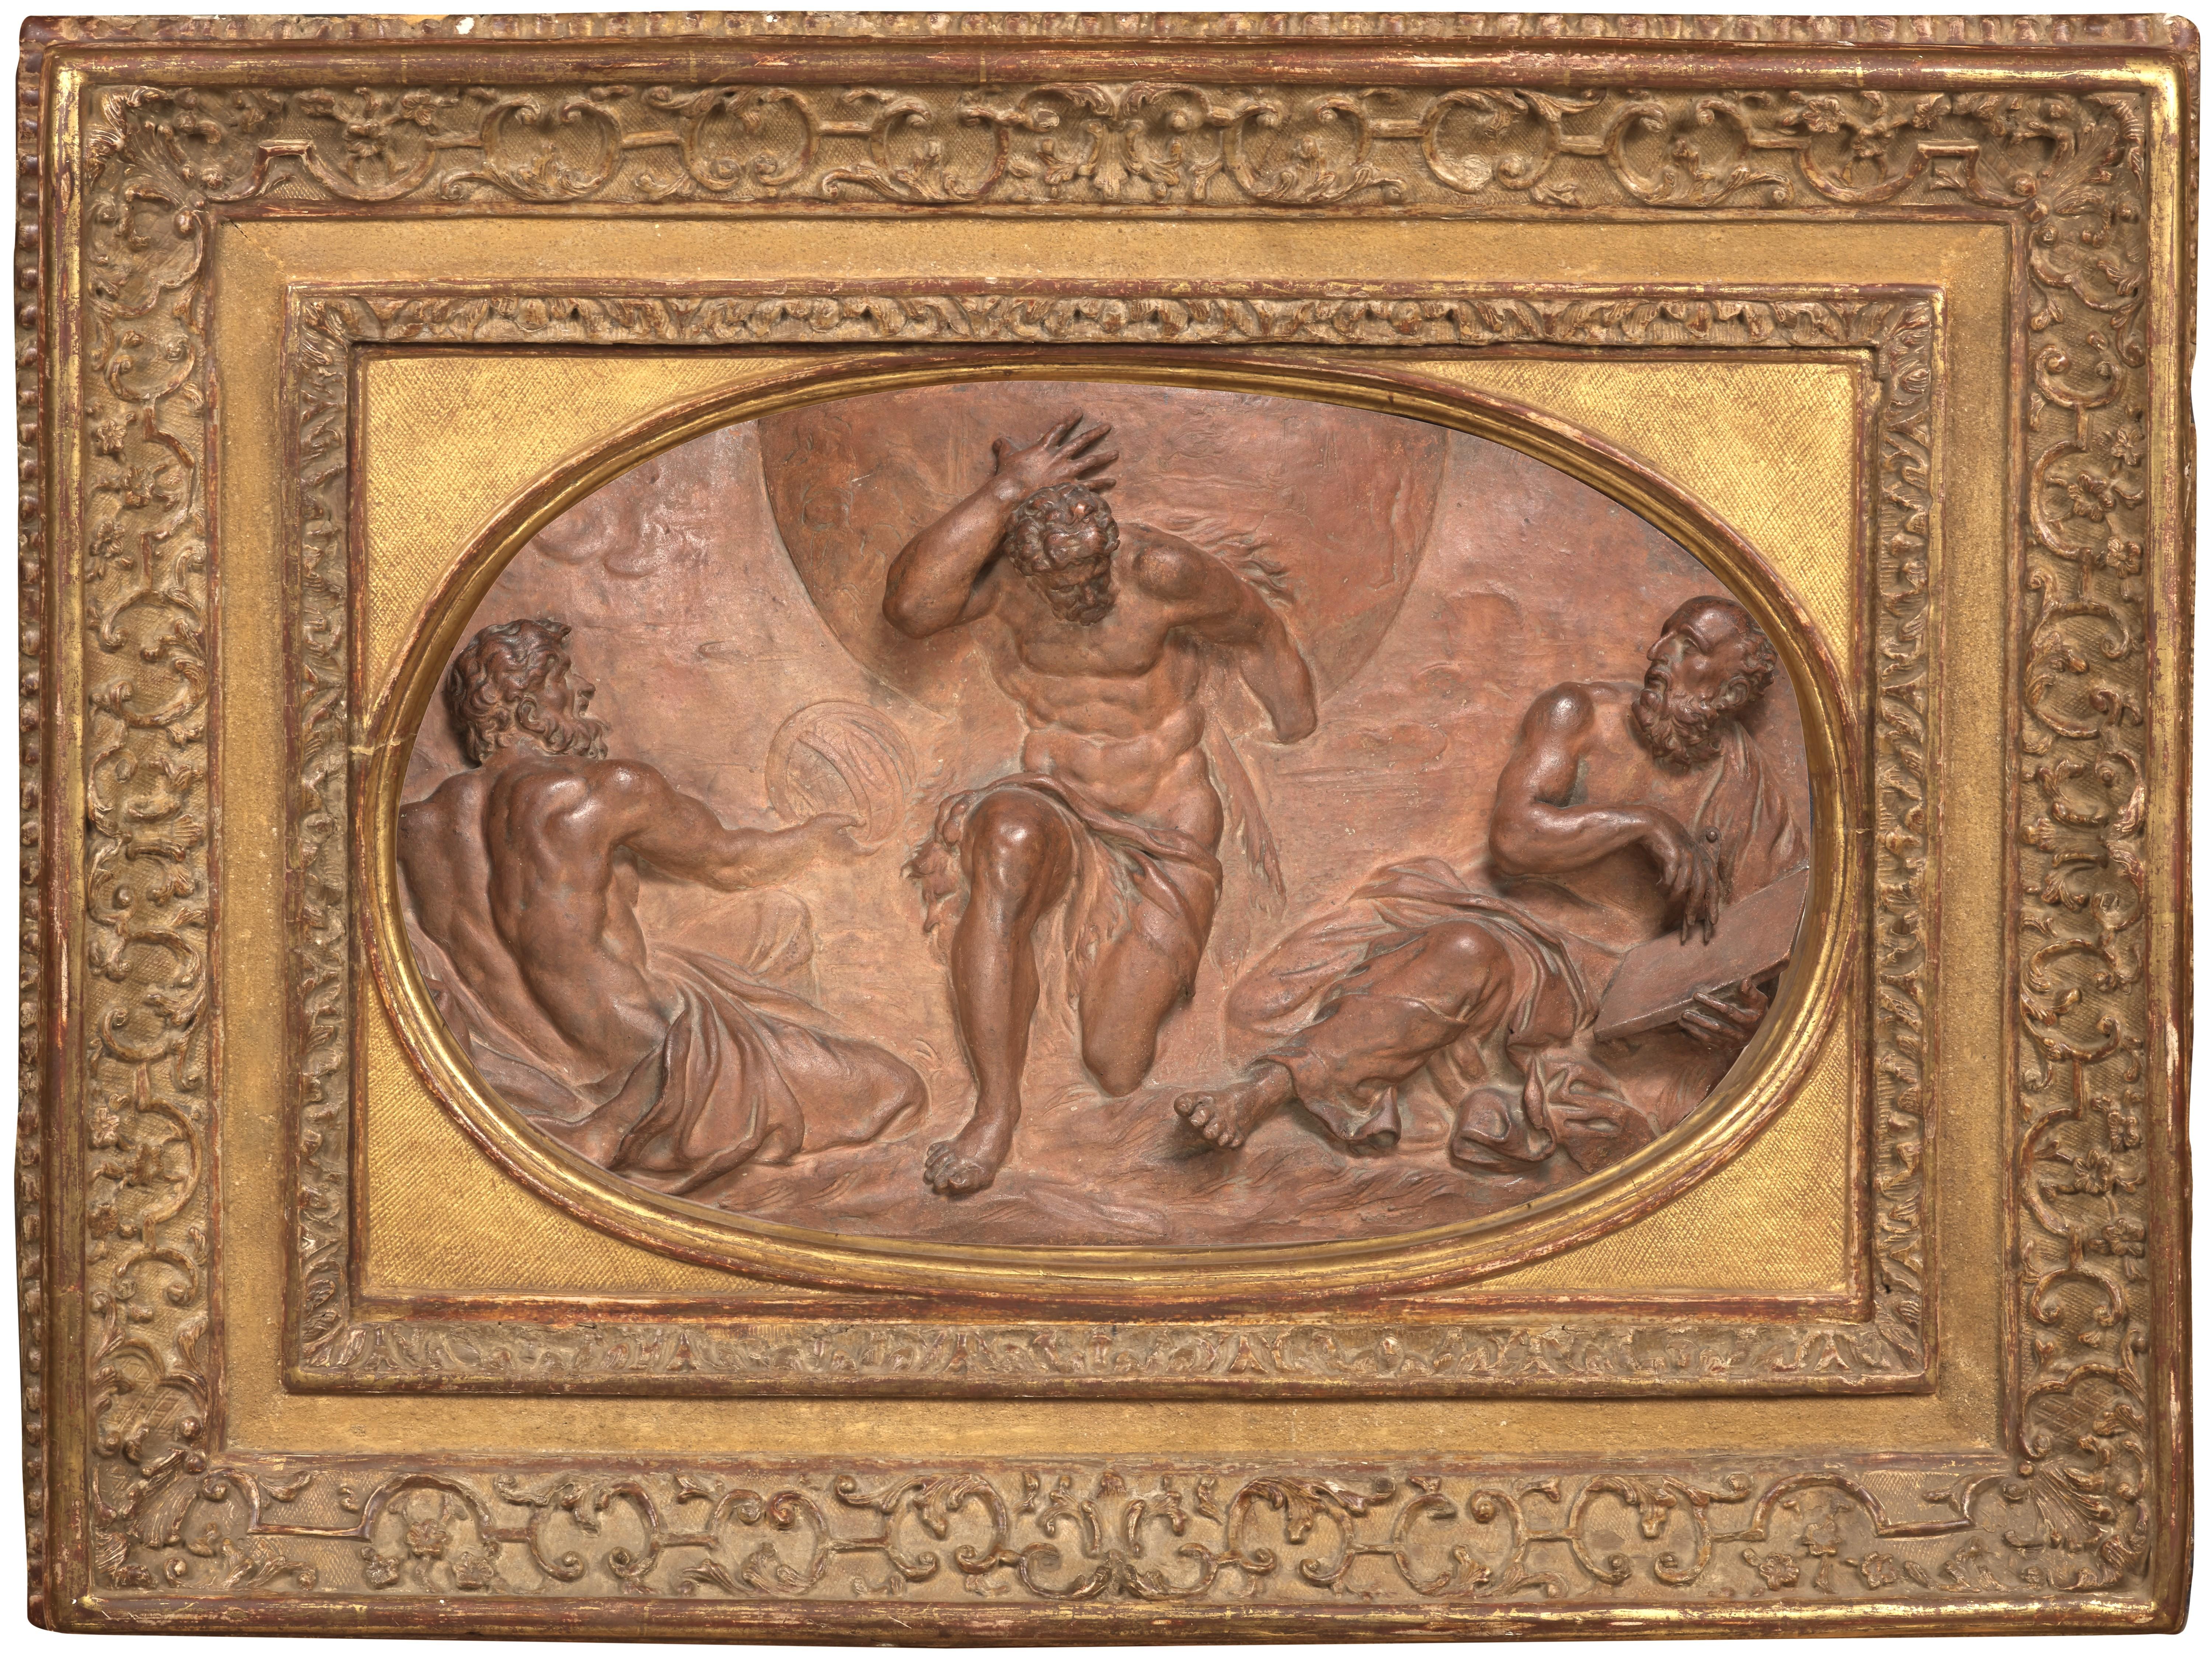 Hercules carrying the World, a sculpture after Annibale Carracci's fresco  1